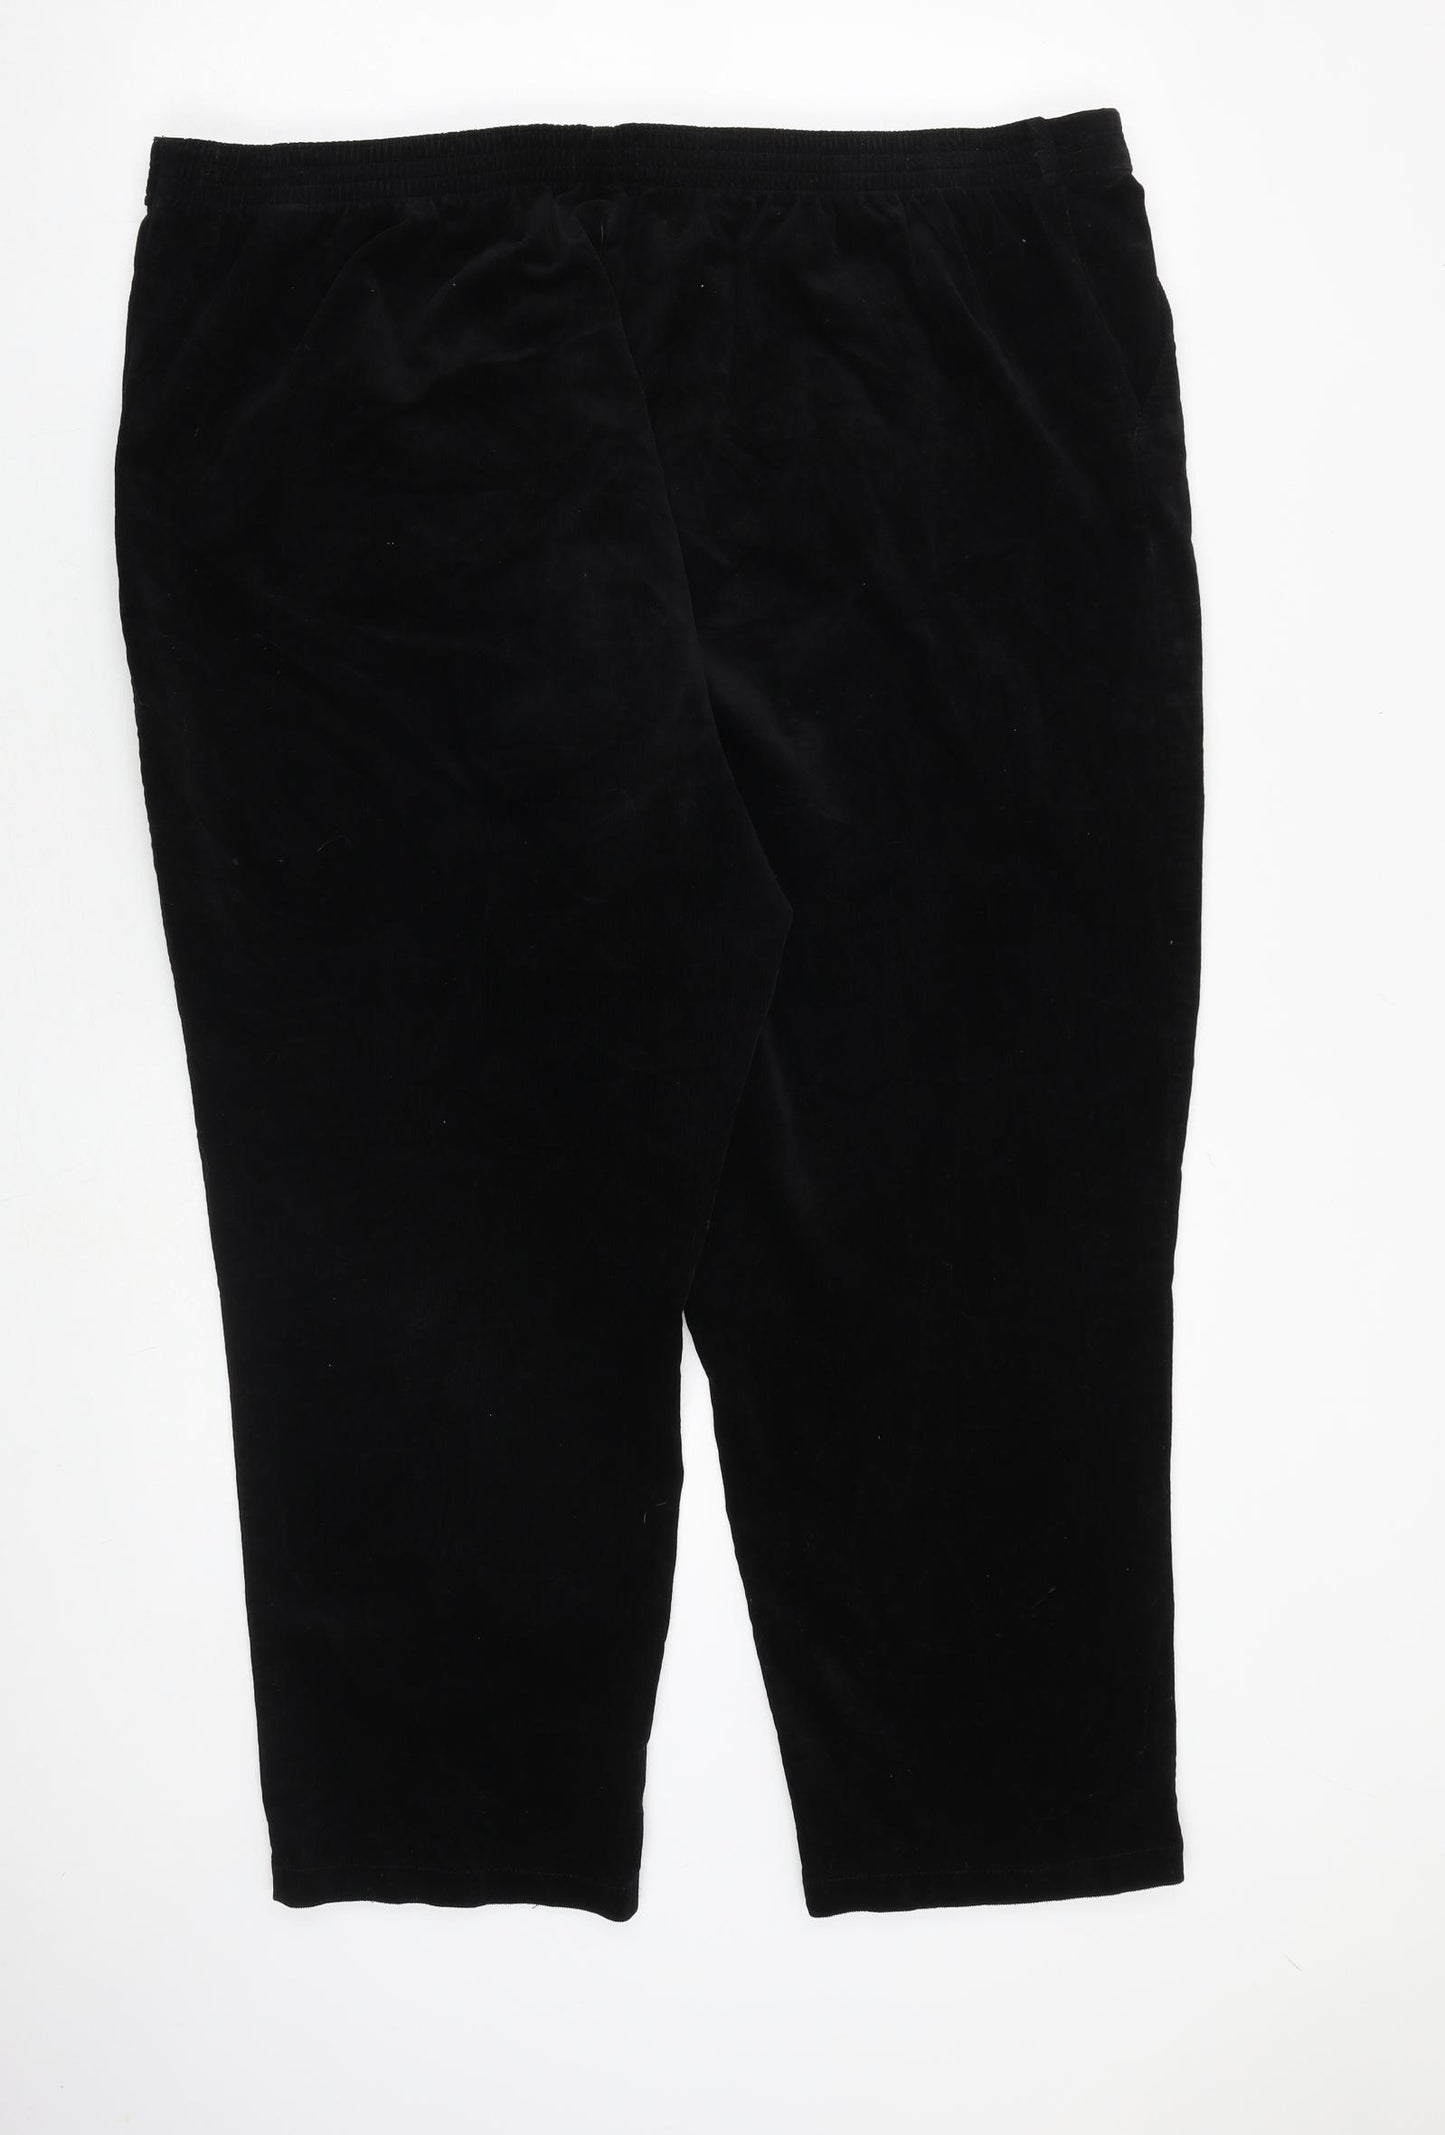 Marks and Spencer Womens Black Cotton Trousers Size 22 L26 in Regular